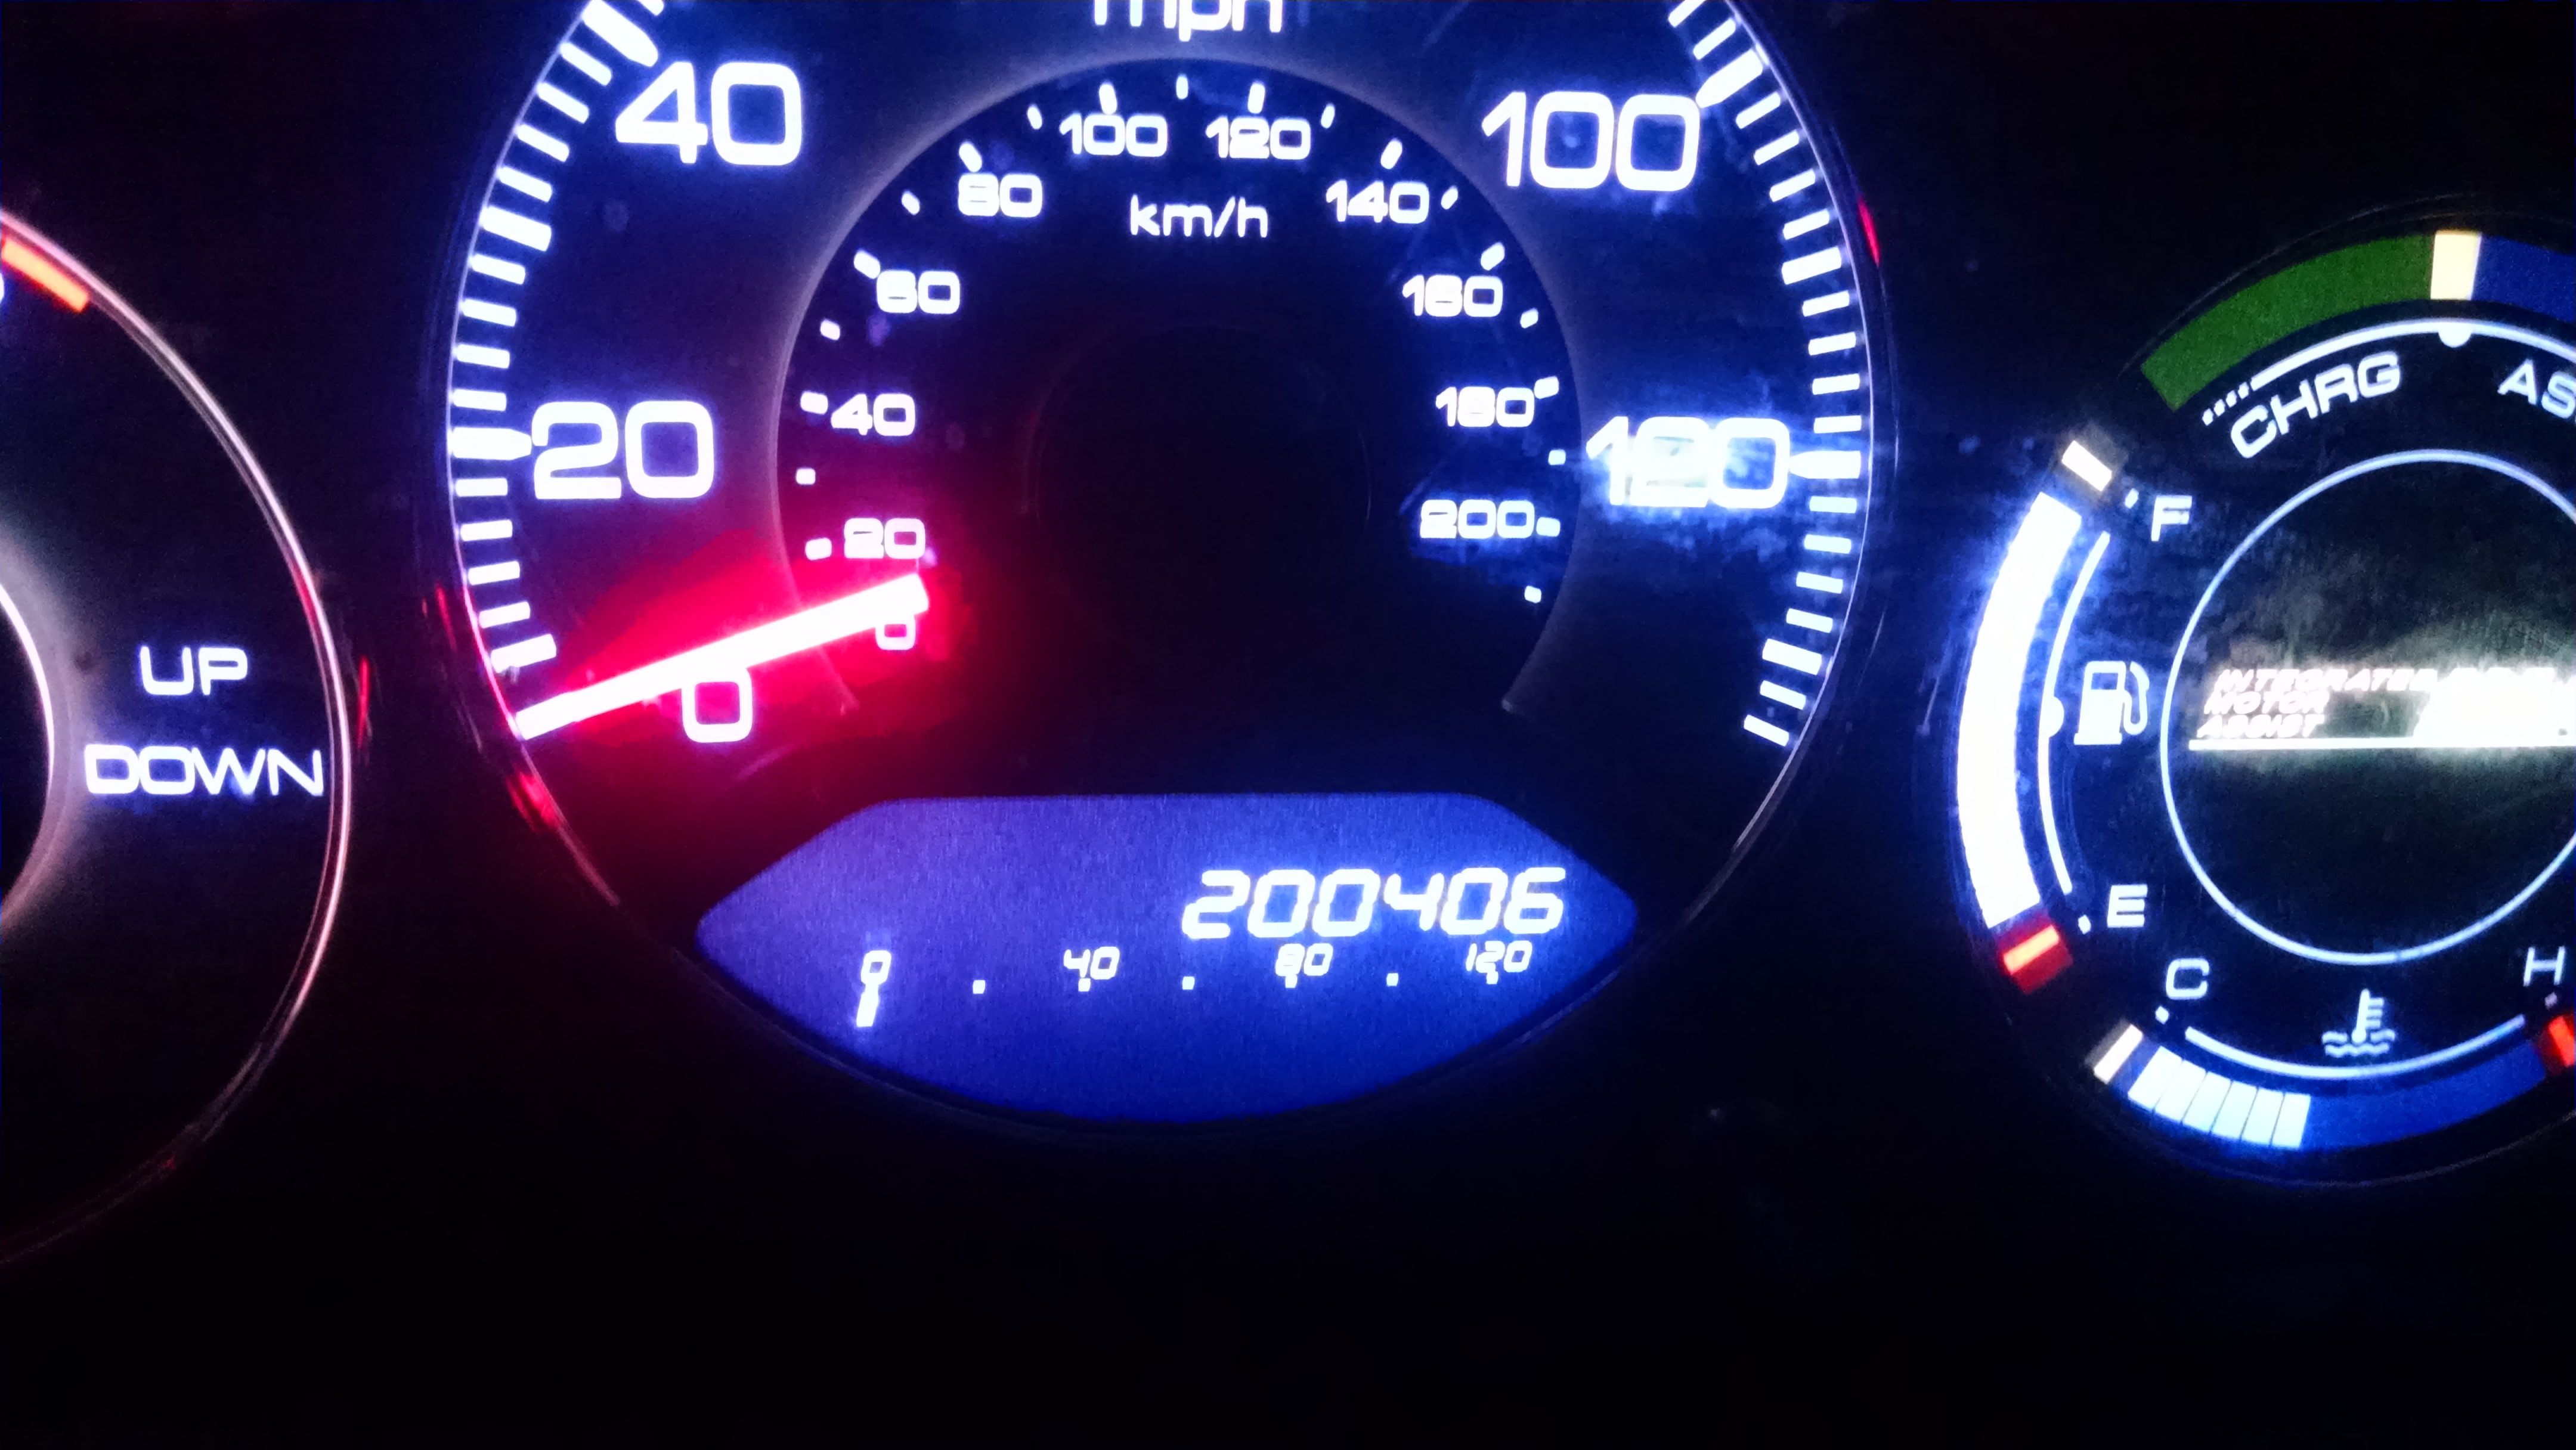 200,000 miles on my car – I remember when 100,000 was astonishing